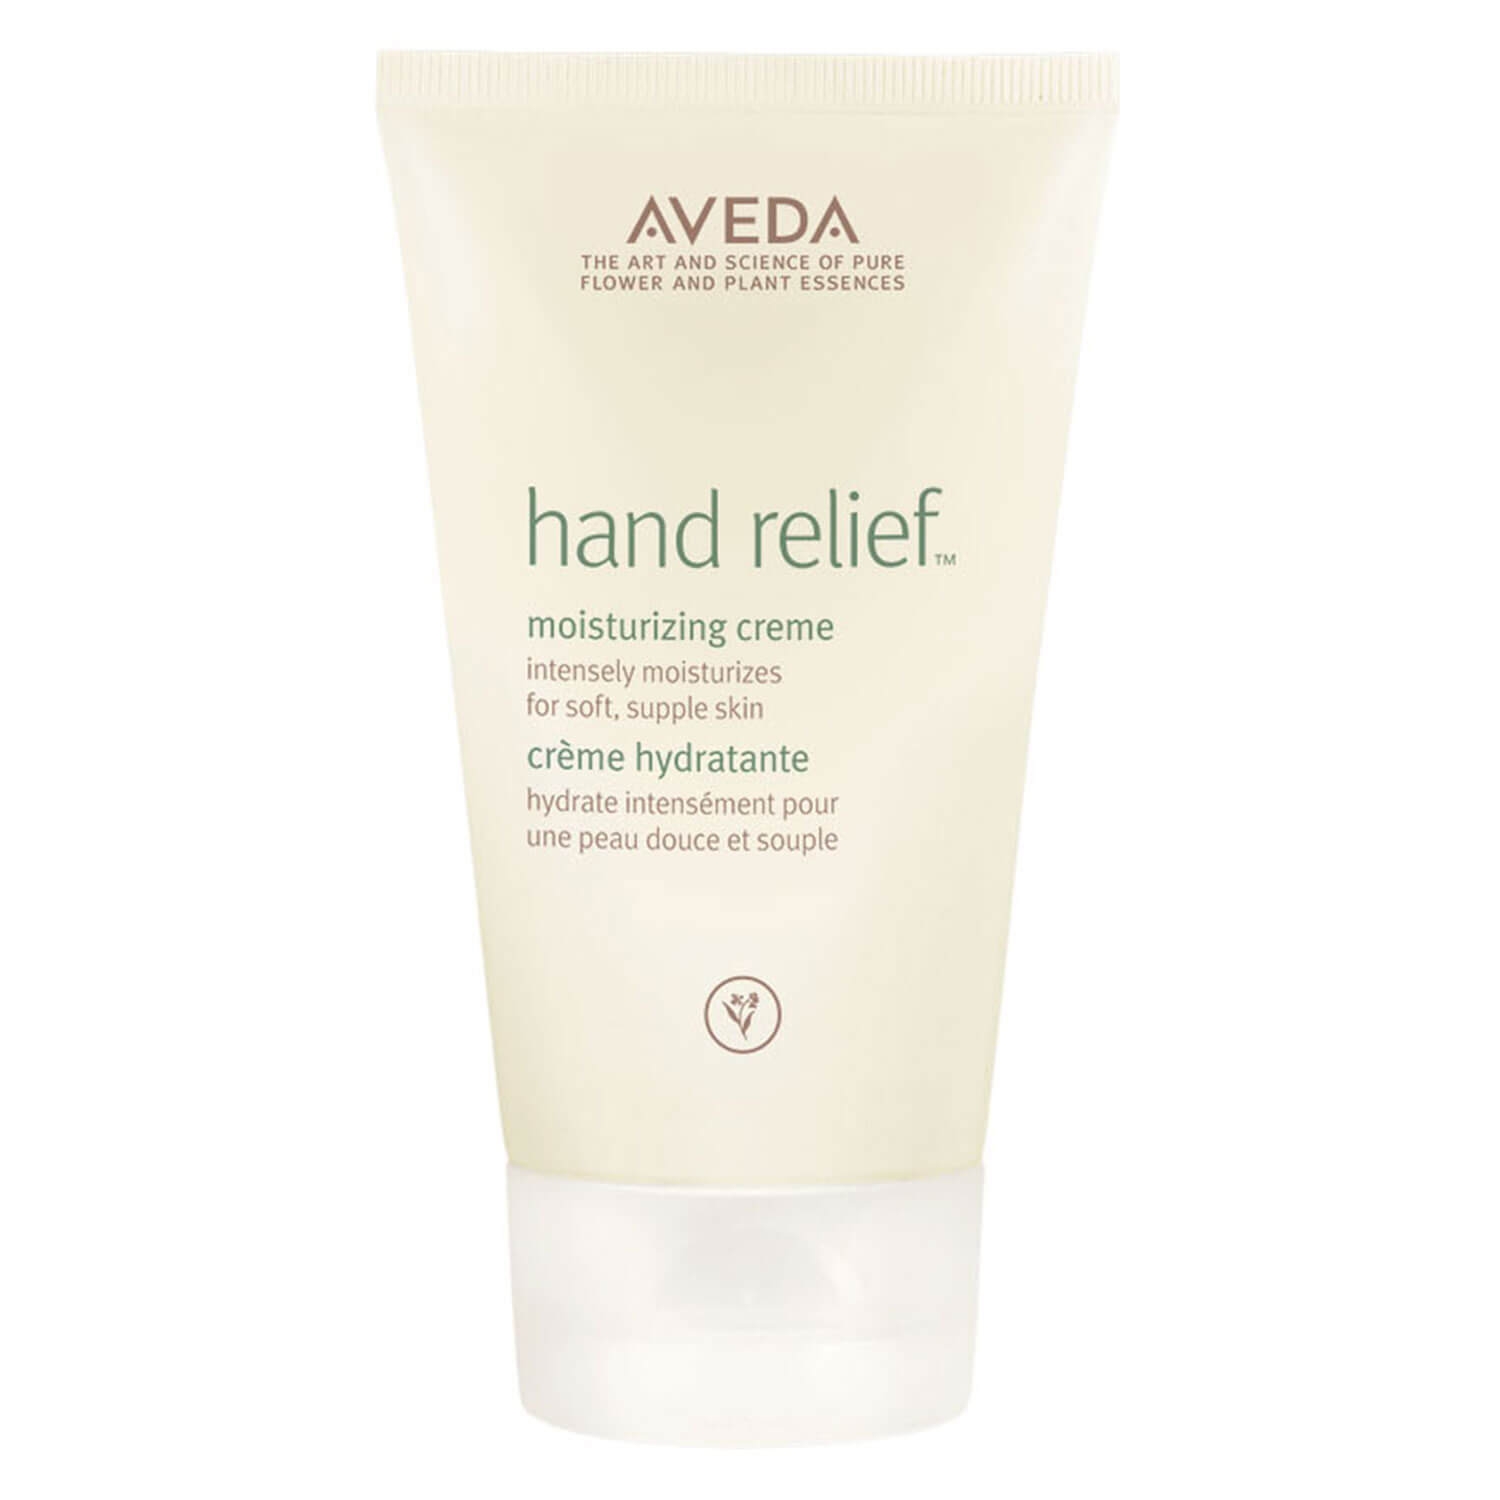 Product image from hand relief - moisturizing creme